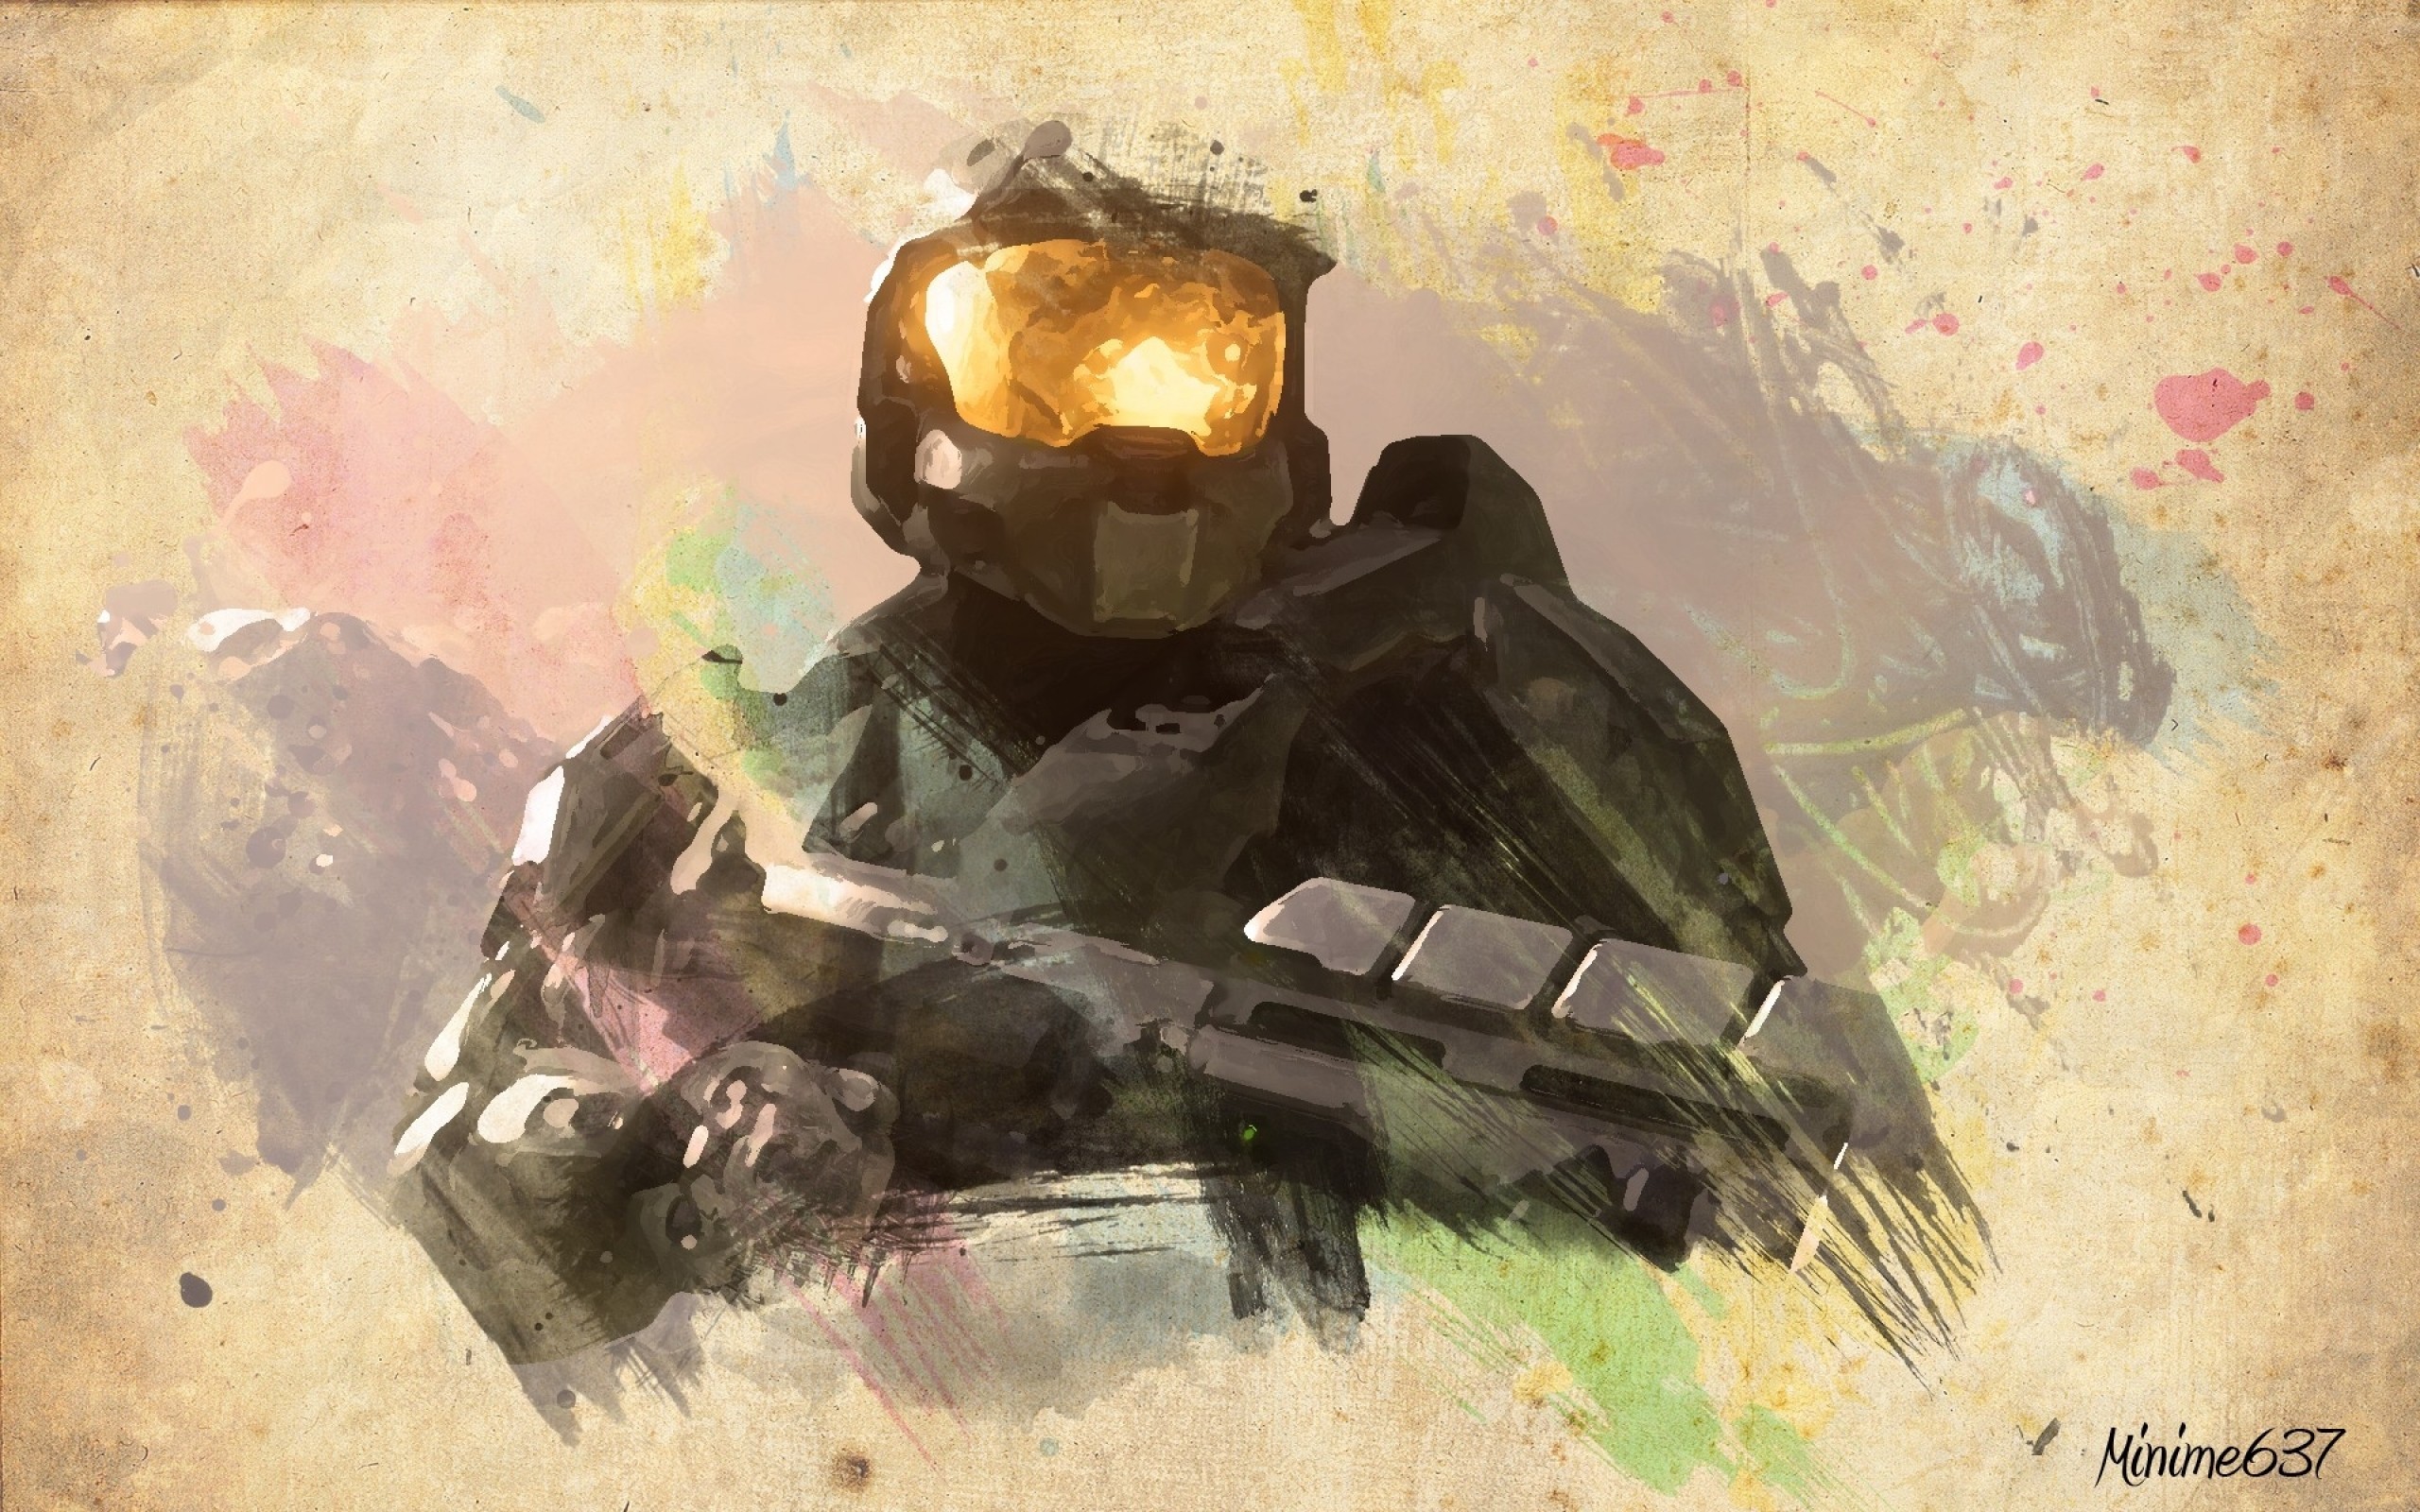 General 2560x1600 Halo (game) Xbox video games science fiction video game art fan art Master Chief (Halo) artwork armor futuristic